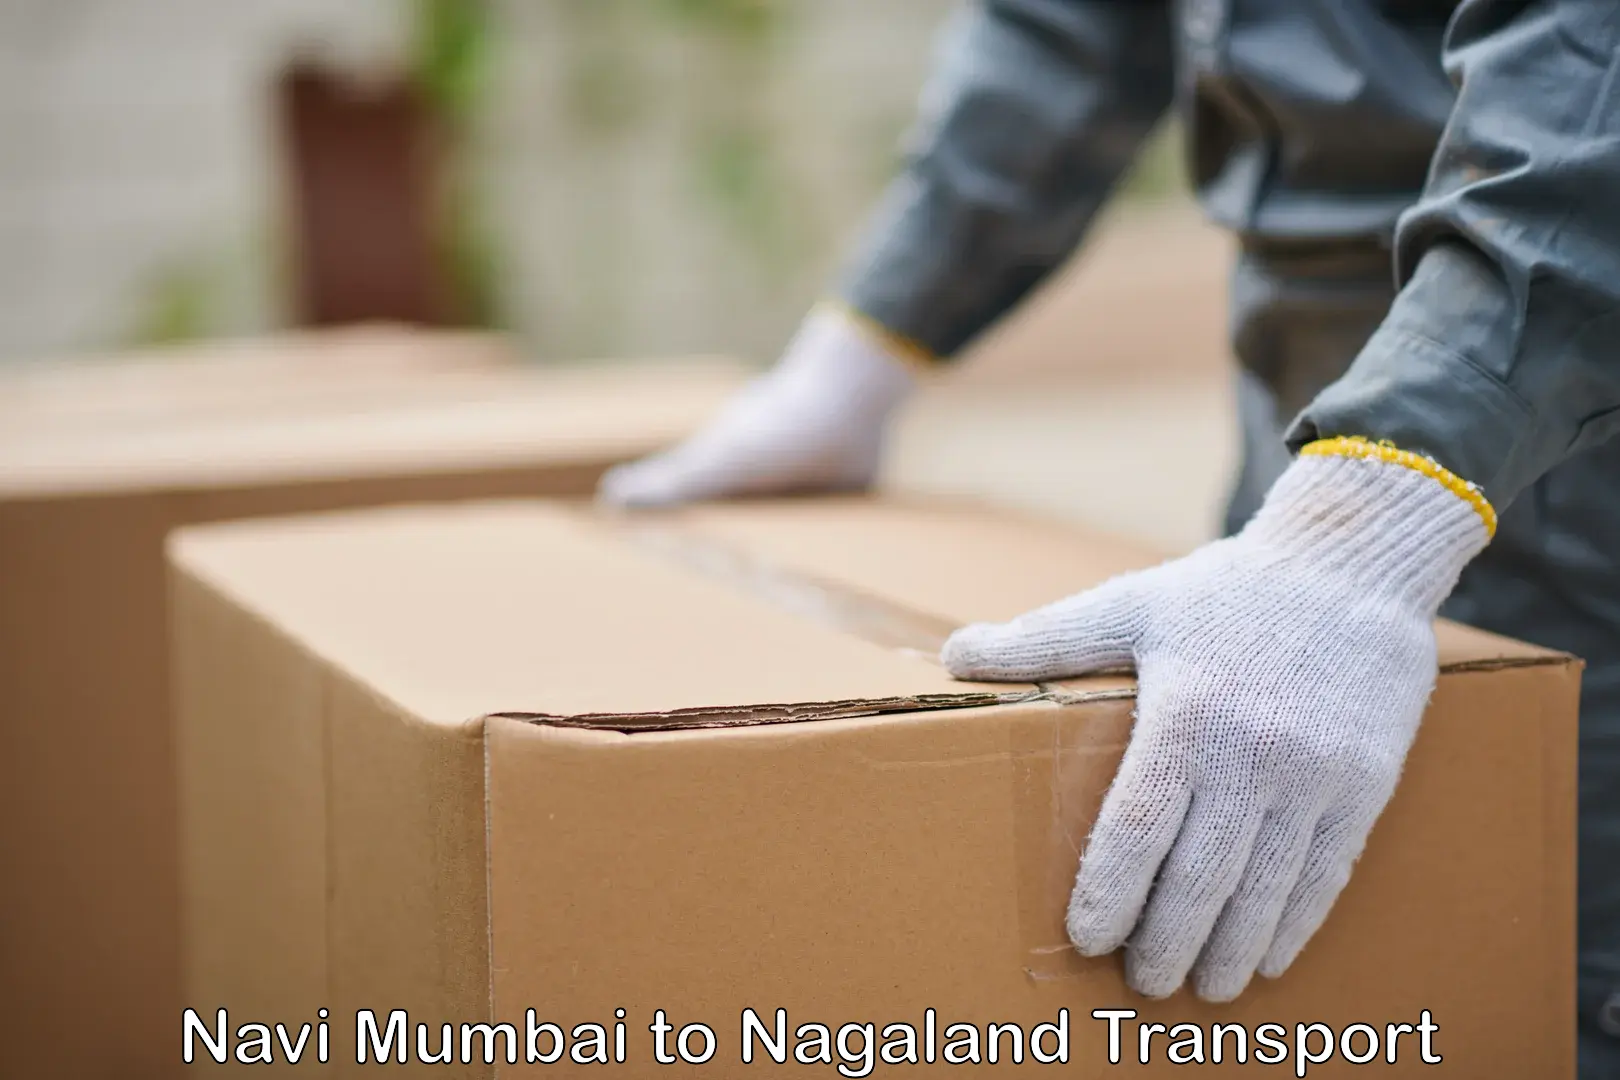 Transport bike from one state to another Navi Mumbai to Nagaland